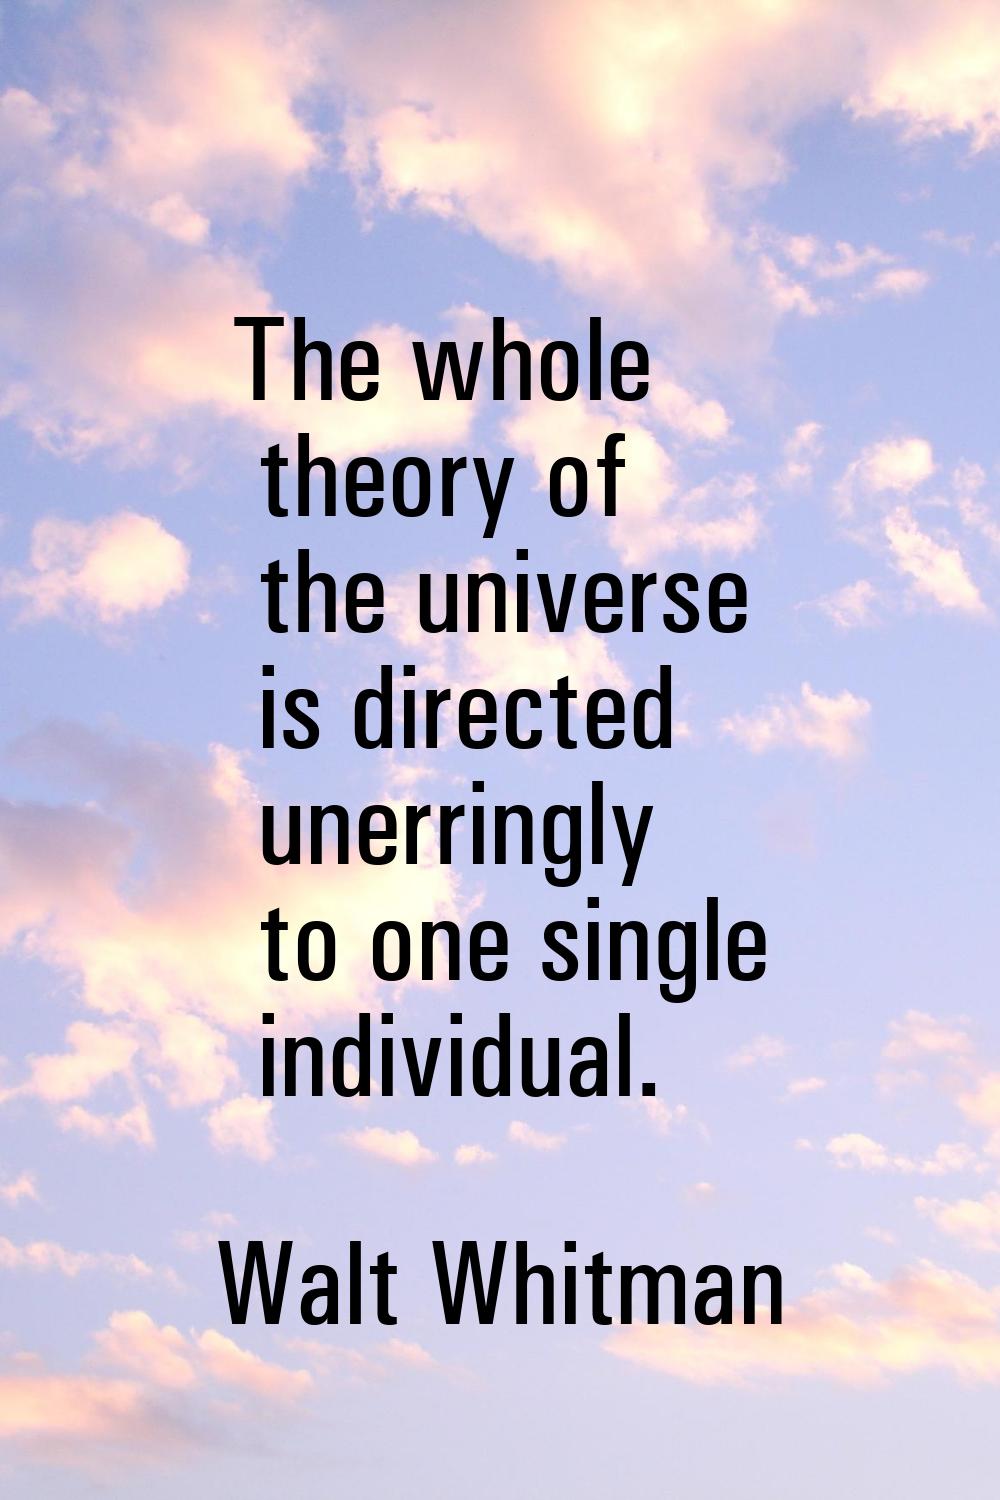 The whole theory of the universe is directed unerringly to one single individual.